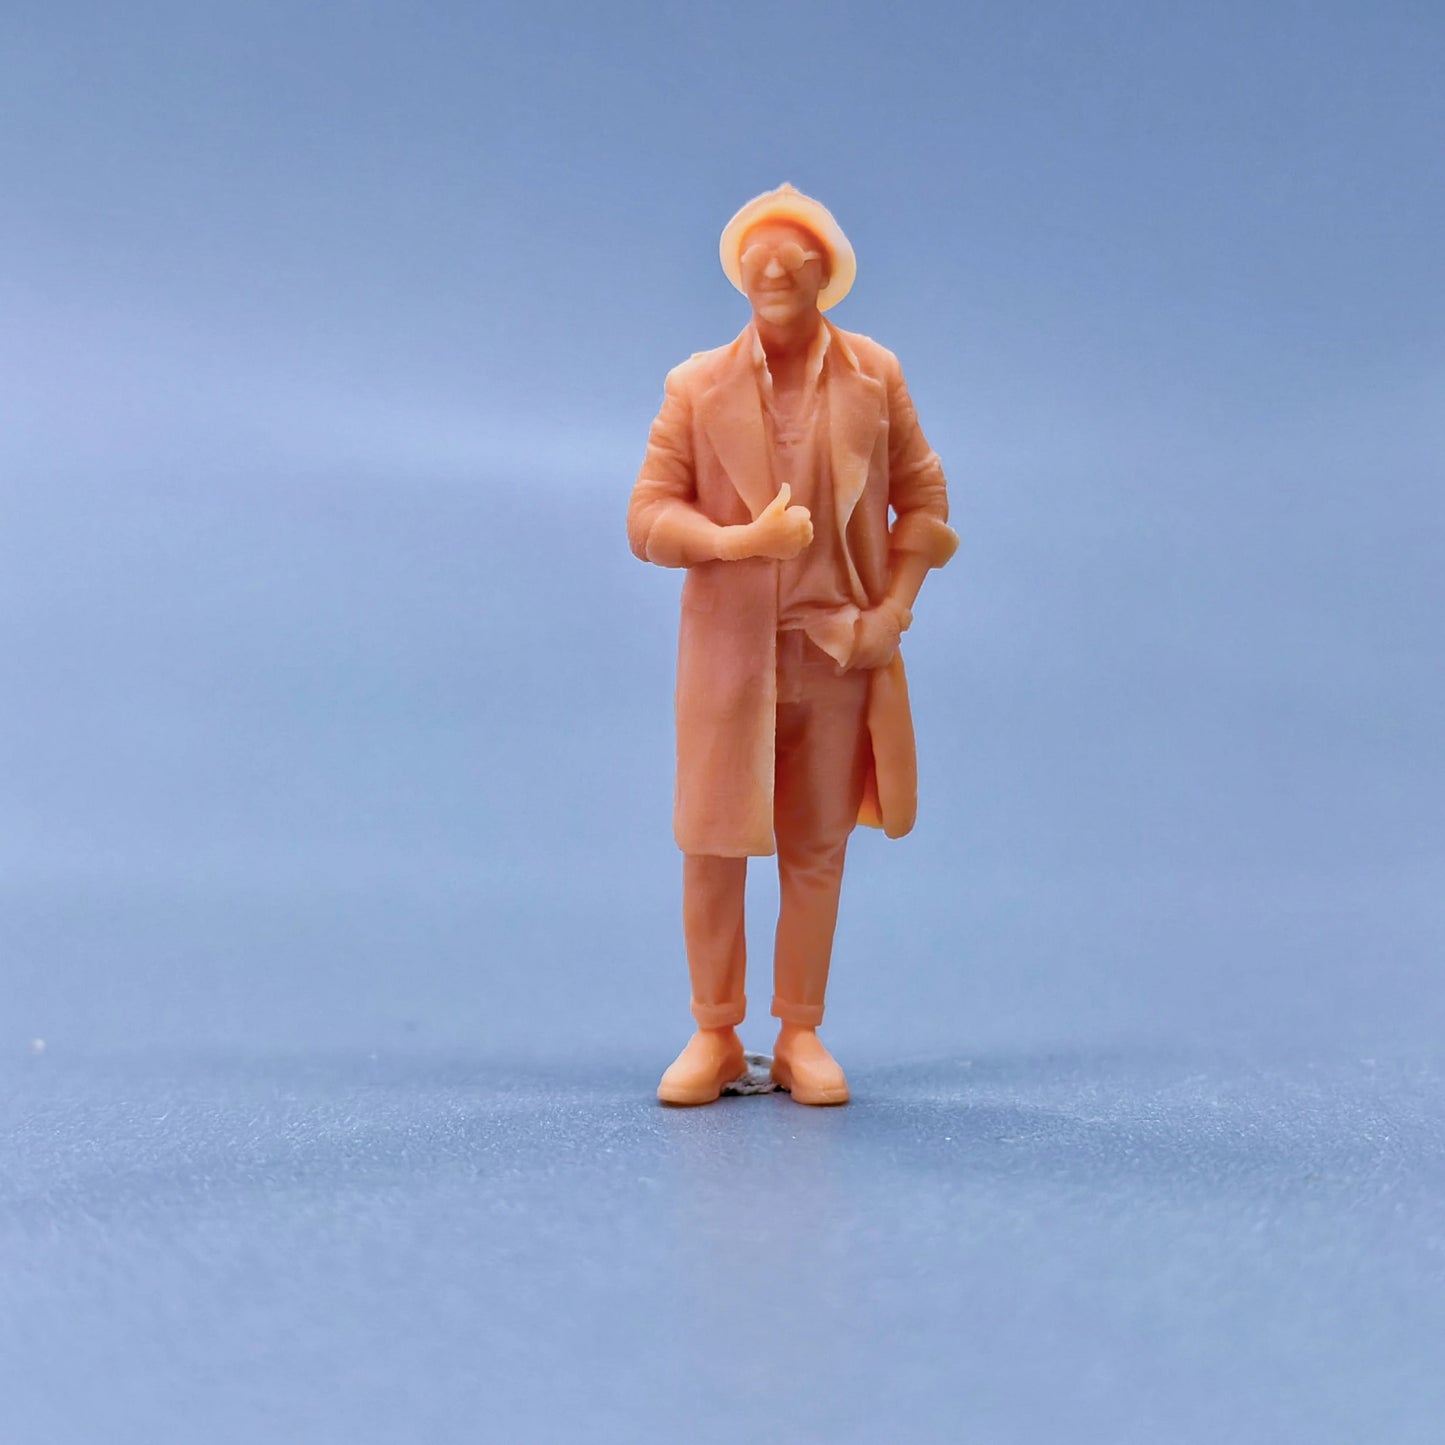 1/64 1/43 Figurines Scale Model Resin Uncle Wearing A Hat and Coat Uncolored Miniatures Diorama Hand-painted  L220